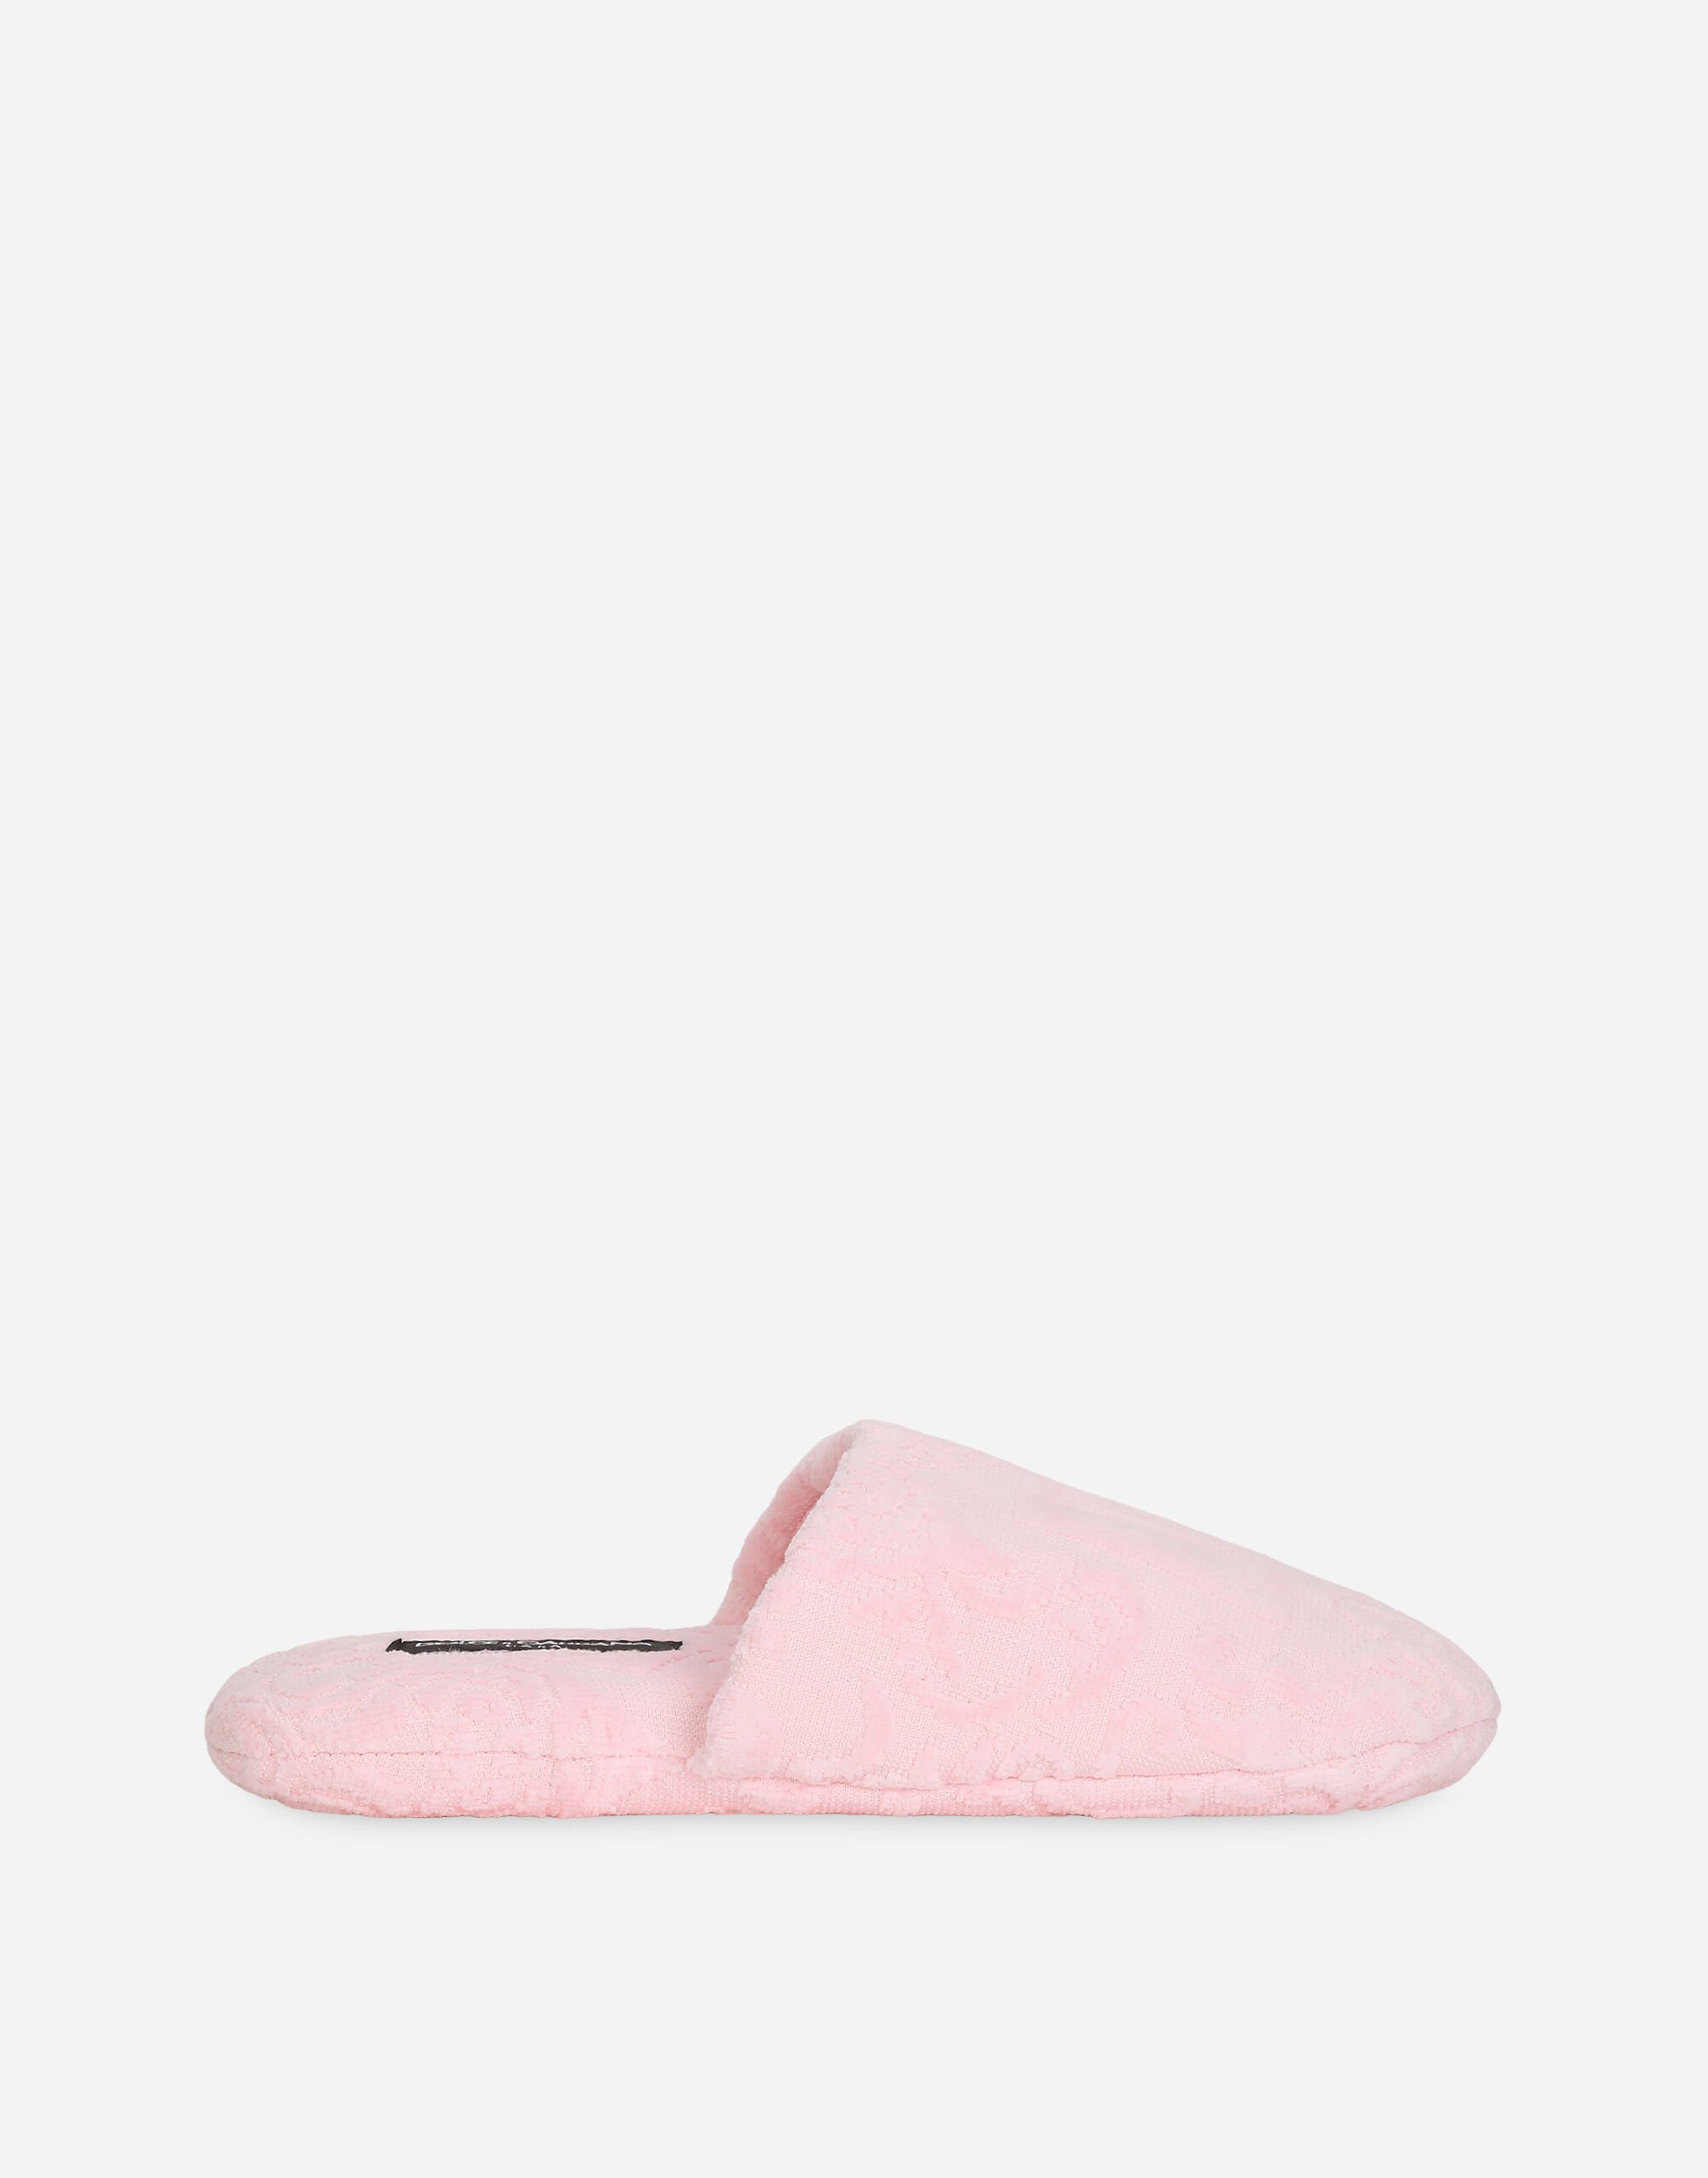 ${brand} Jacquard Cotton Terry Slippers ${colorDescription} ${masterID}